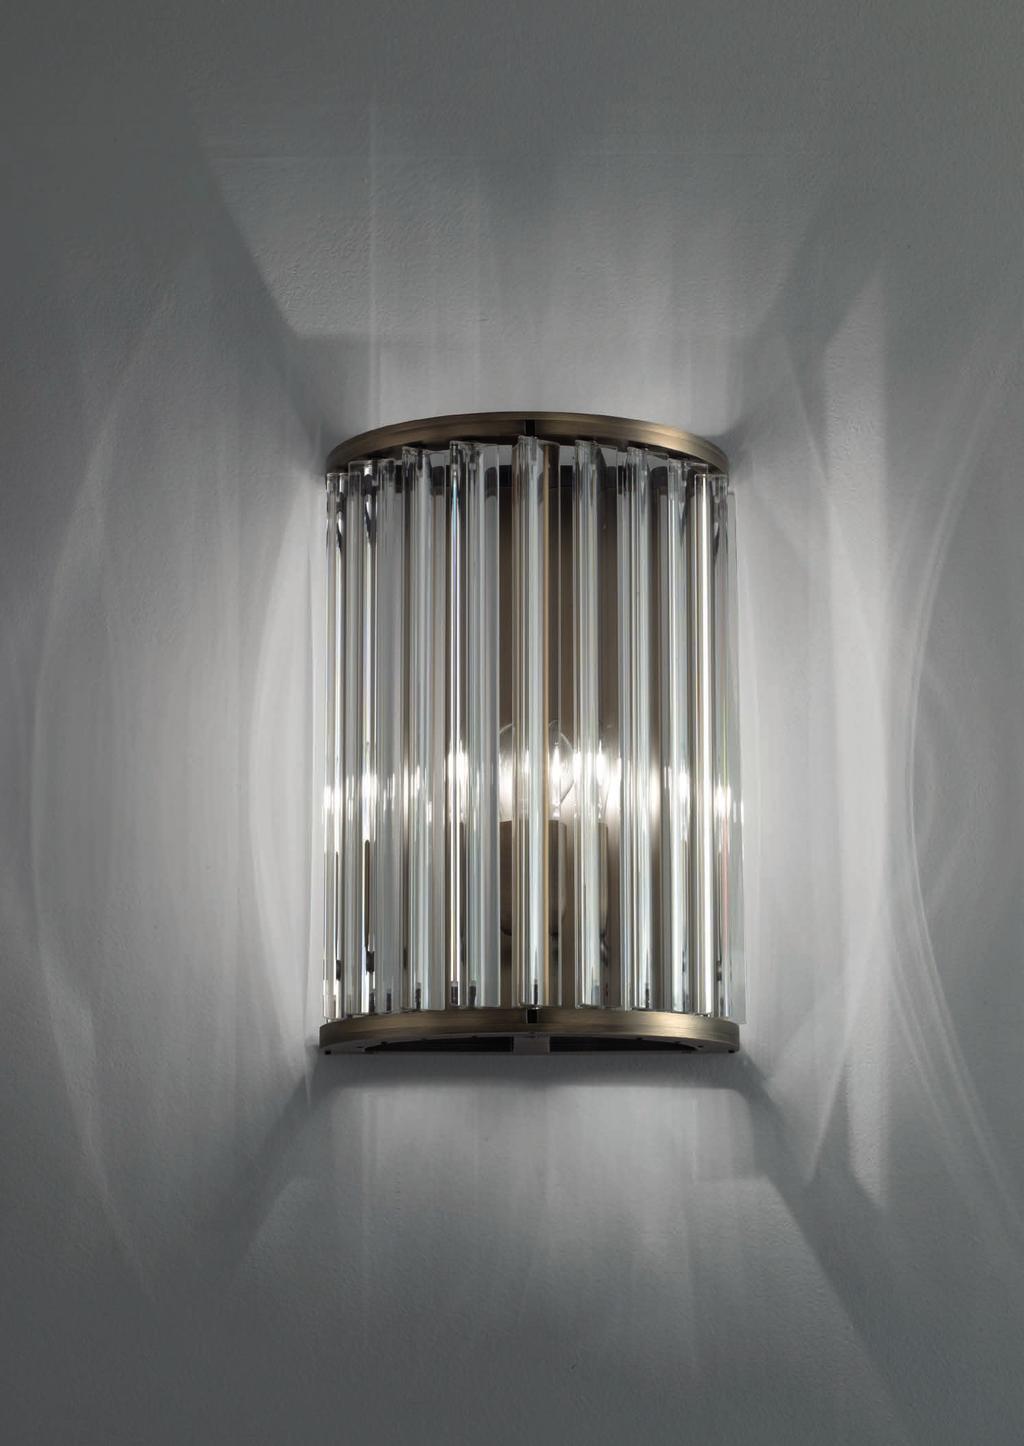 CROWN WALL 14cm-5 5 35cm-13 7 26cm-10 Wall lamp with diffuse light. Dark bronze striped structure with crystal, amber or smoke trihedrons.